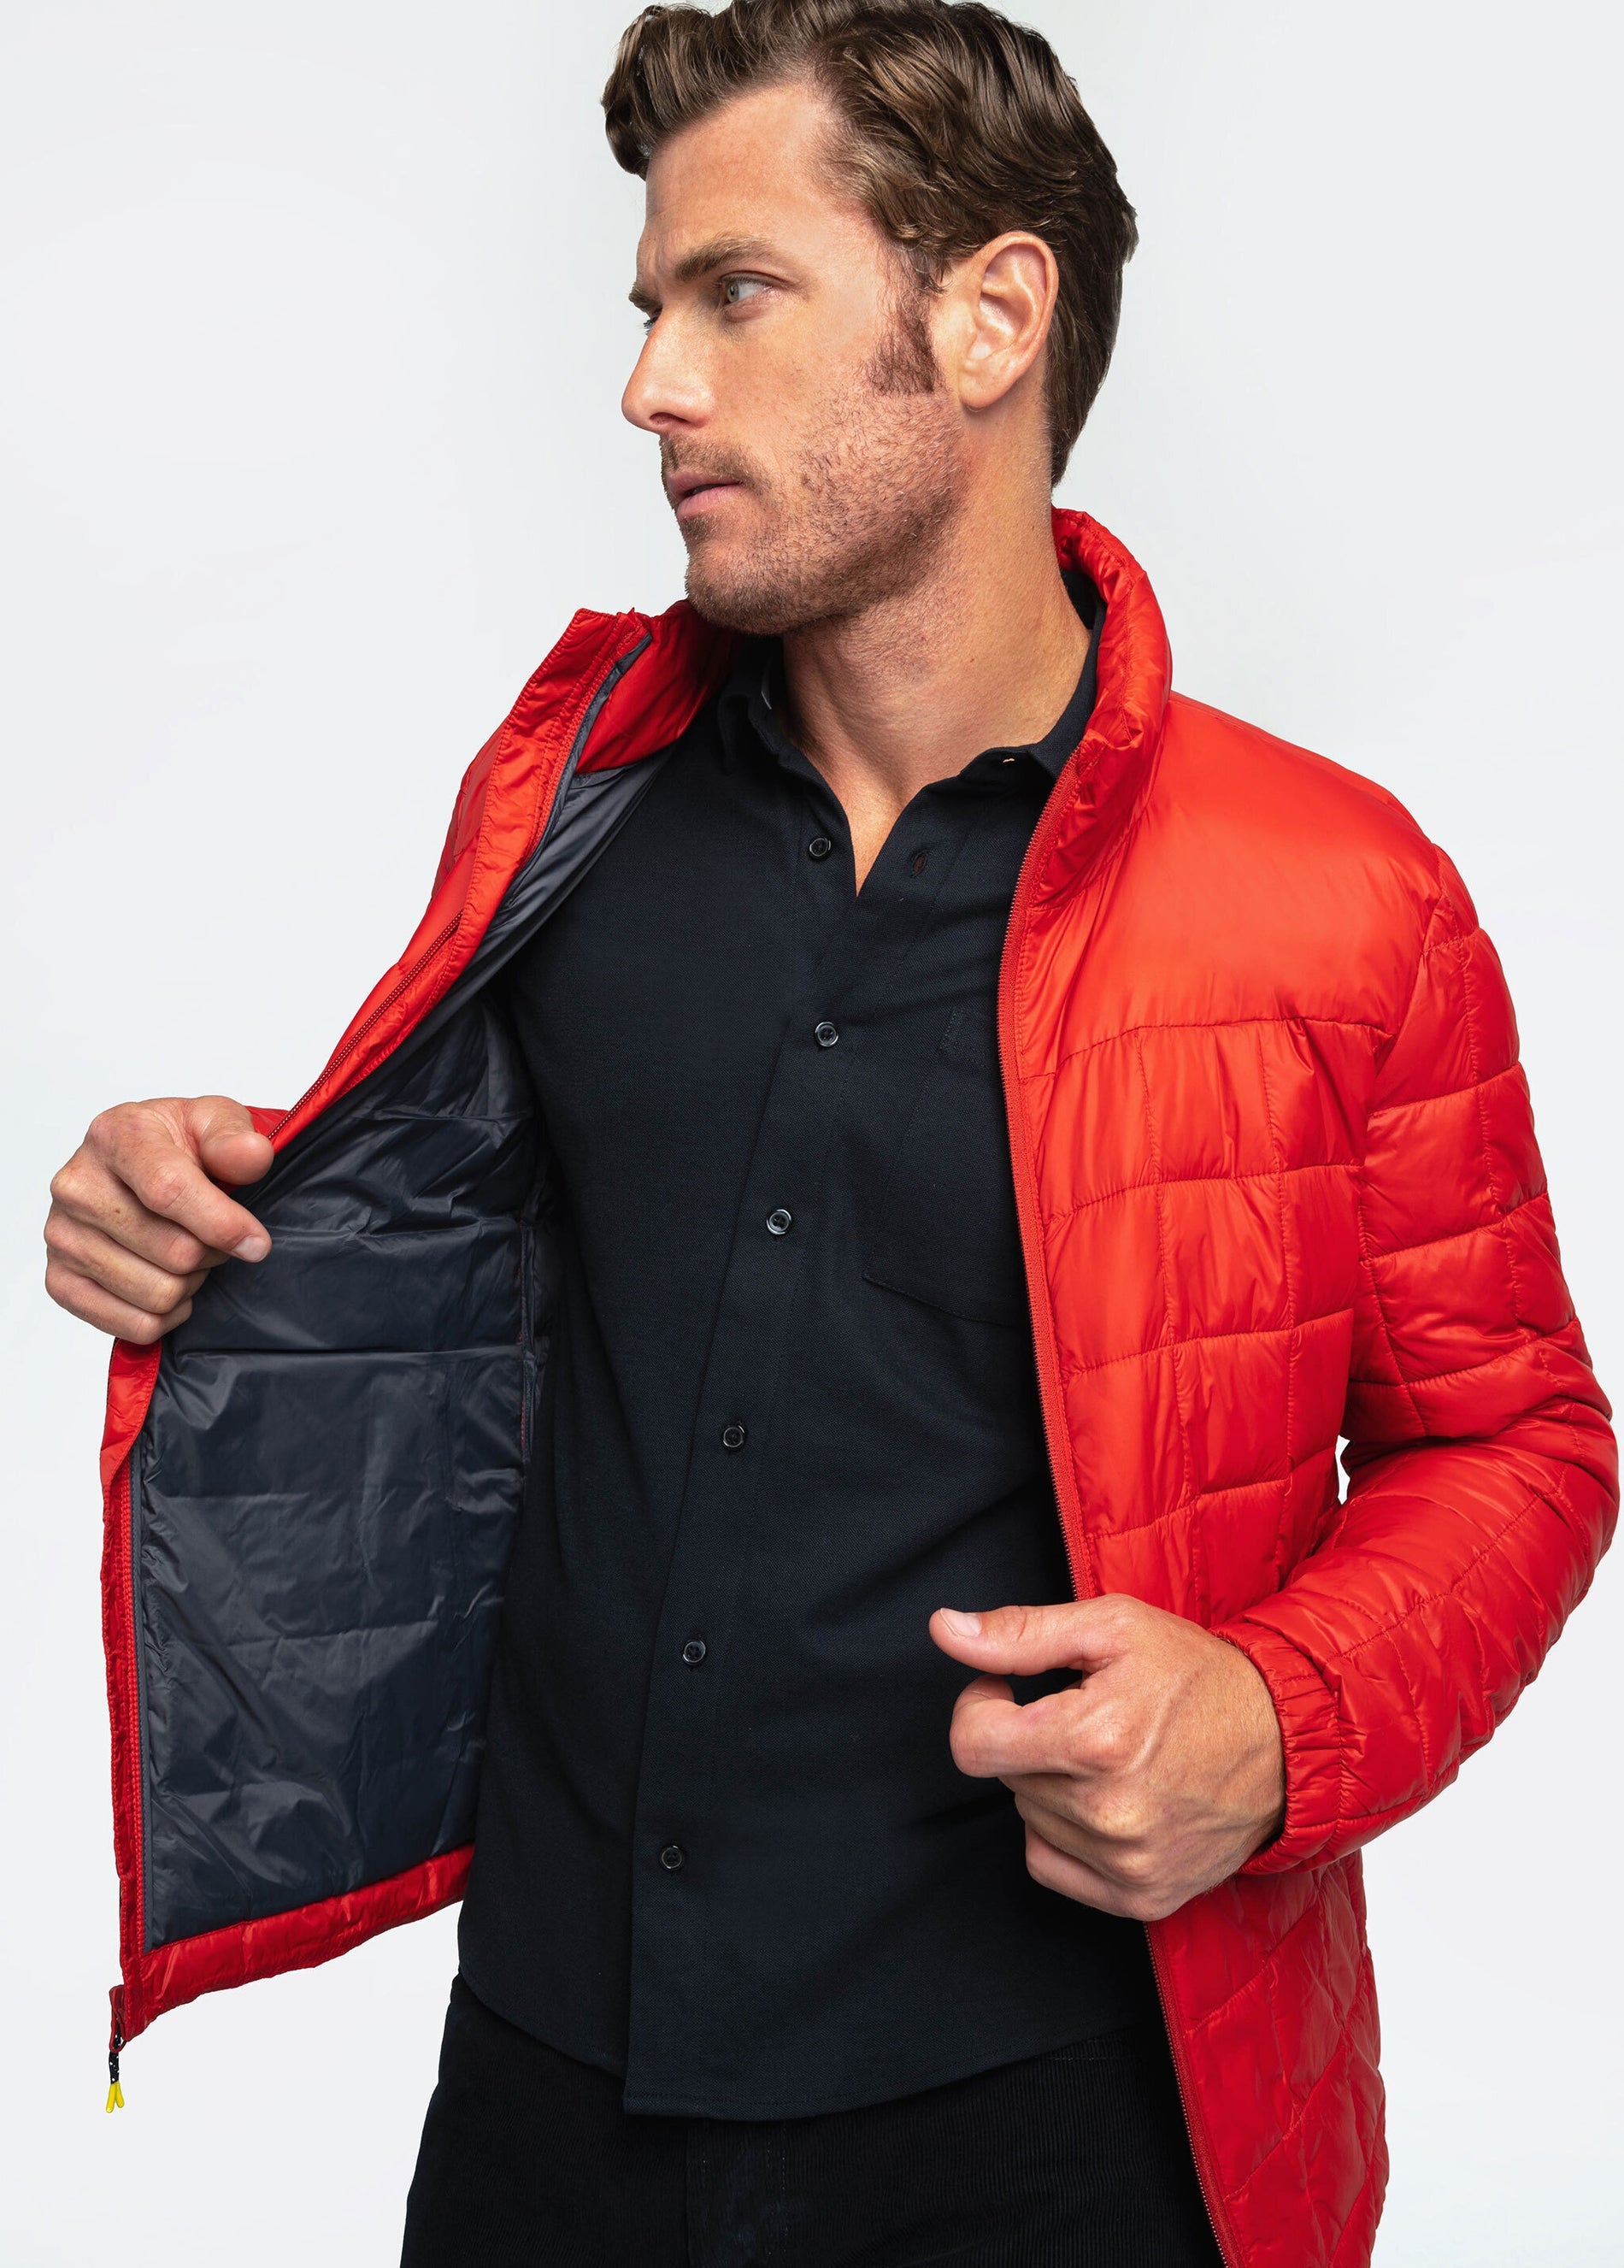 LOLE - The Kaslo Down Synth Jacket